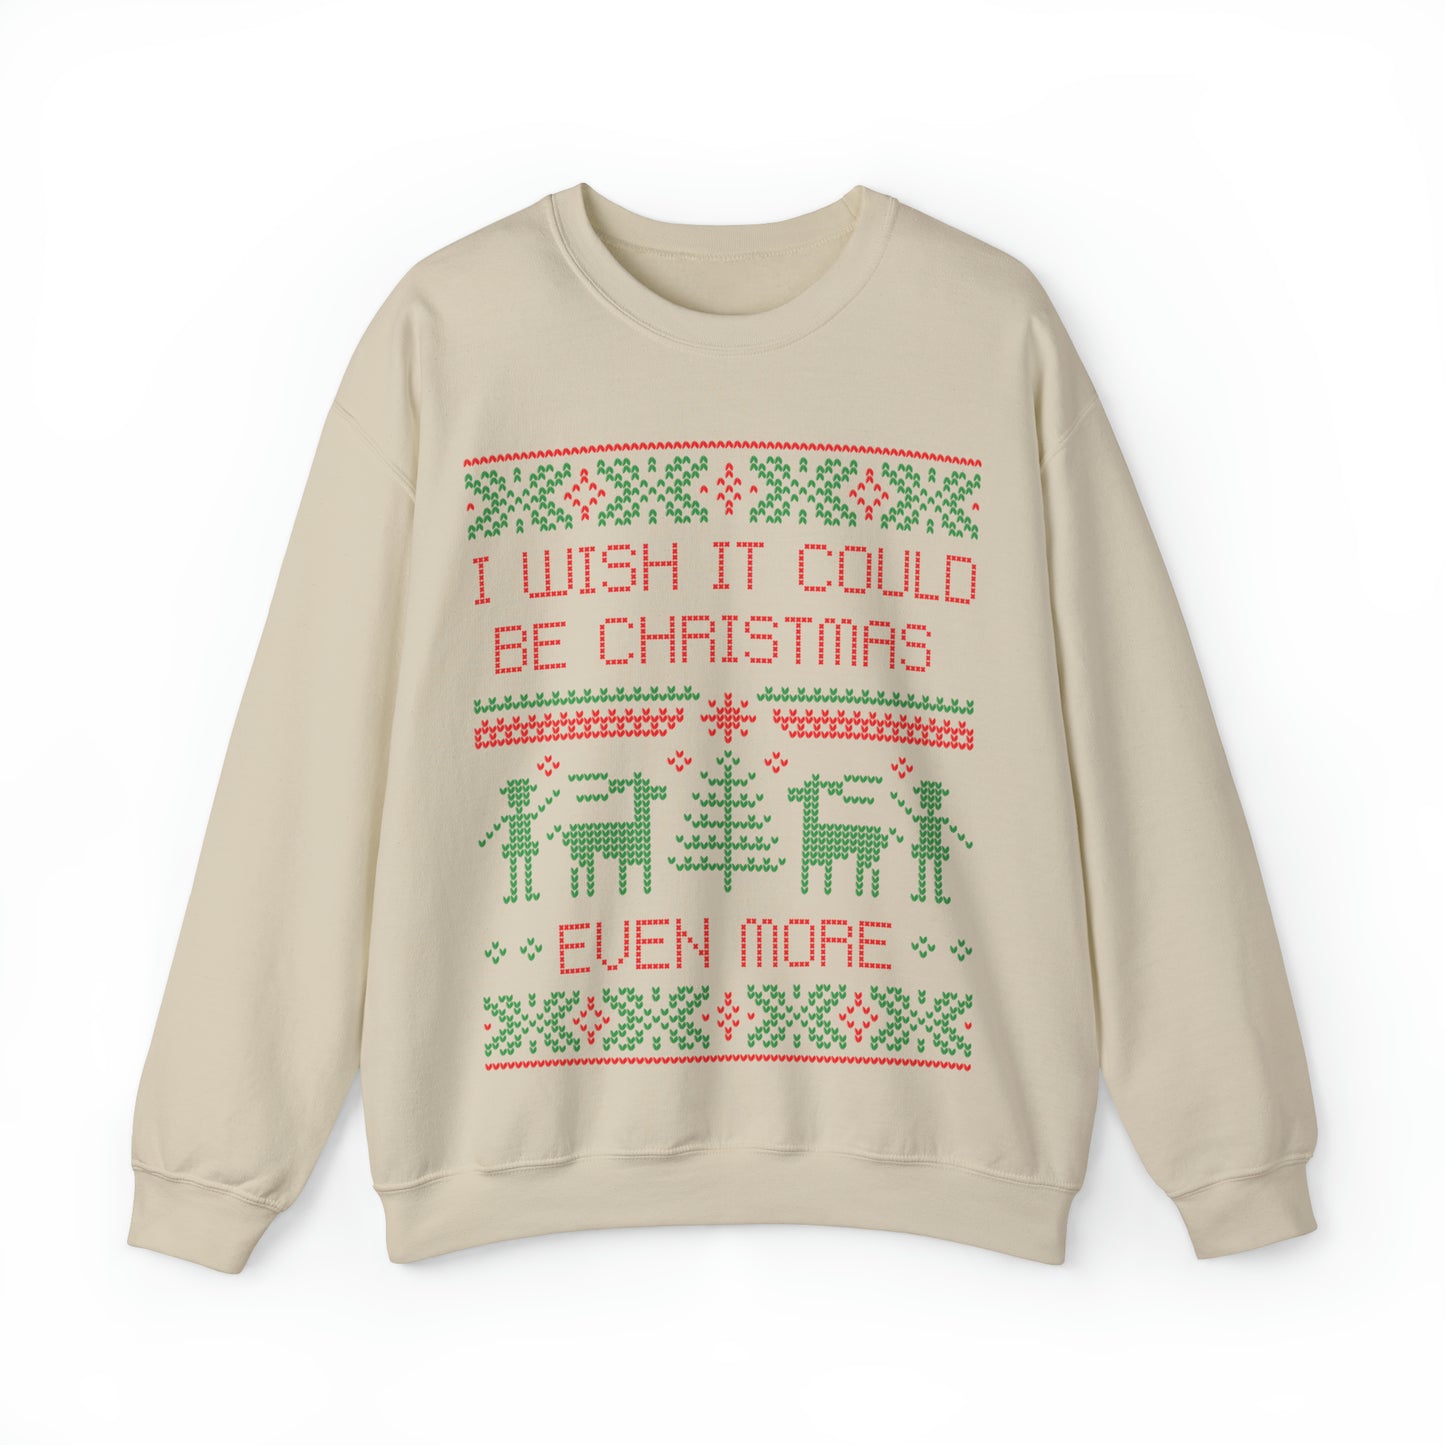 "I Wish It Could Be Christmas Even More" Sweatshirt